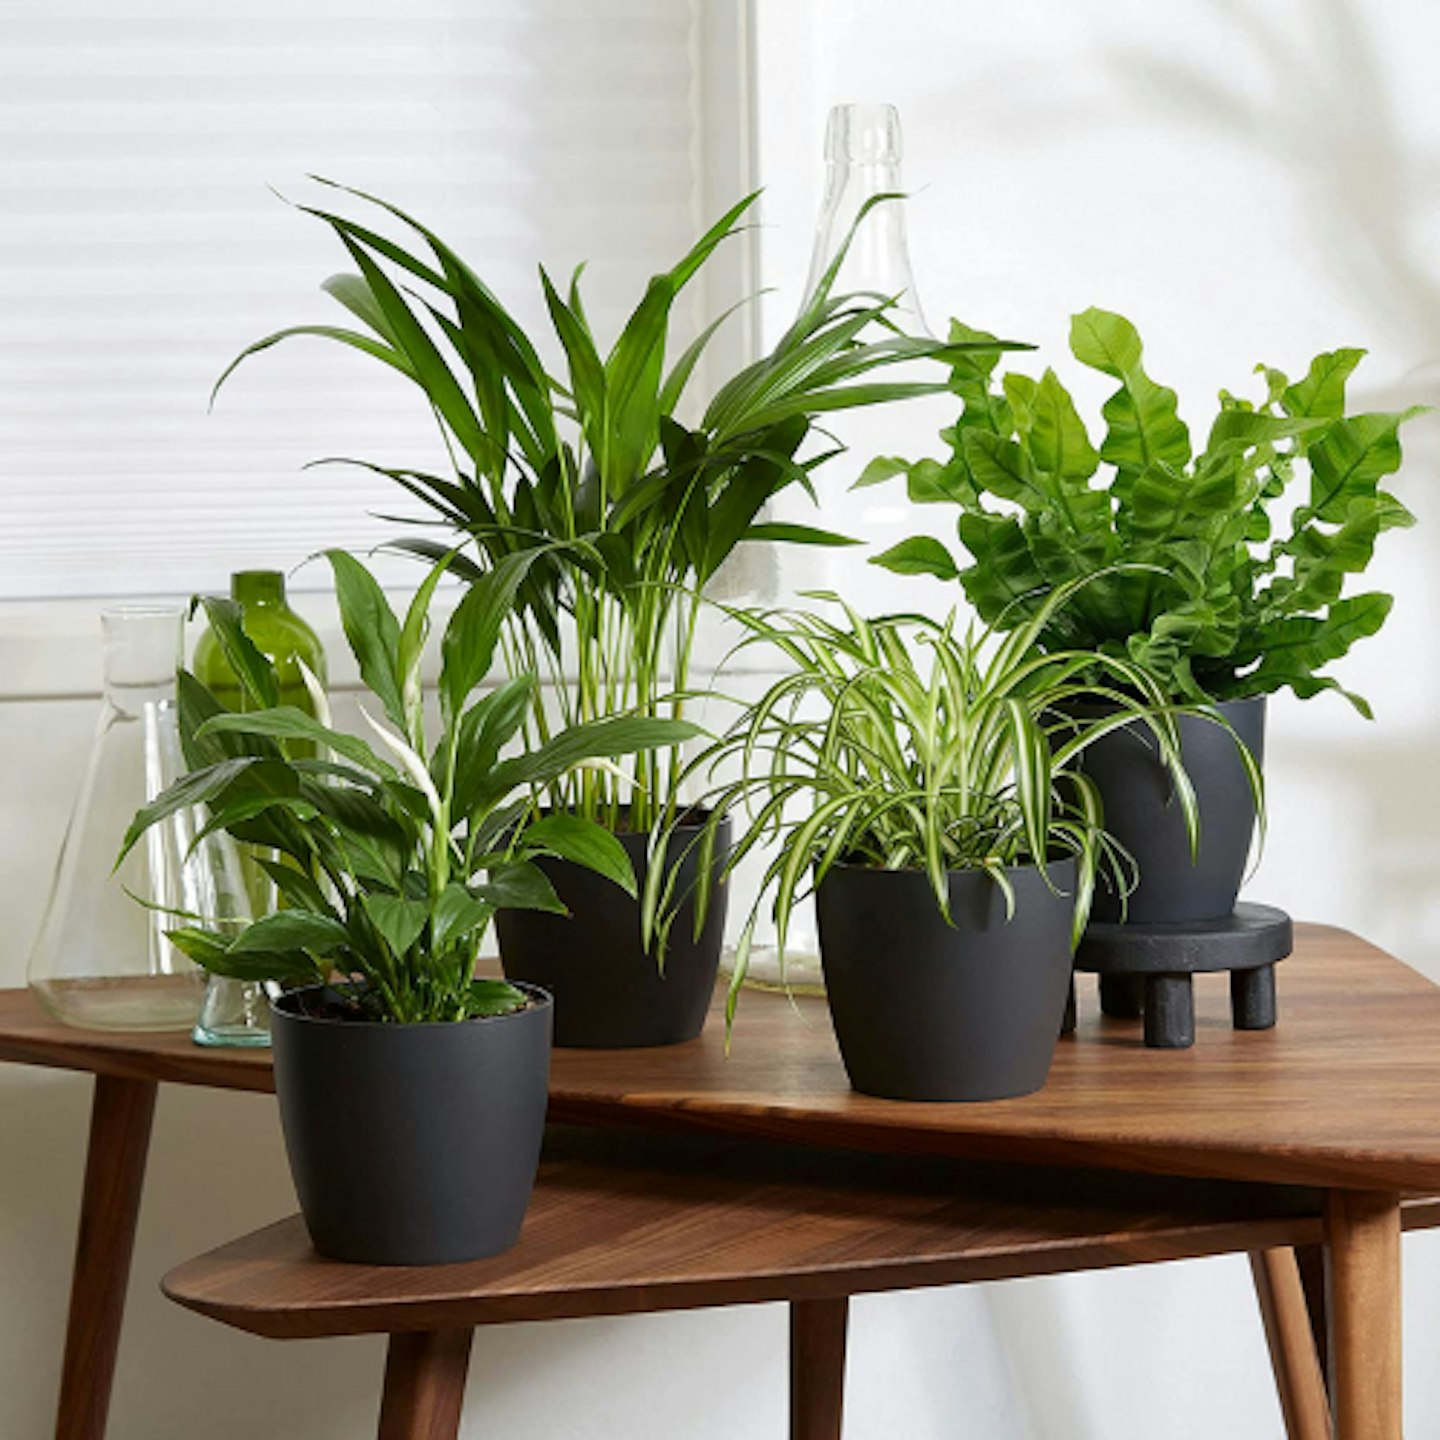 Set of 4 Air-Purifying Plants